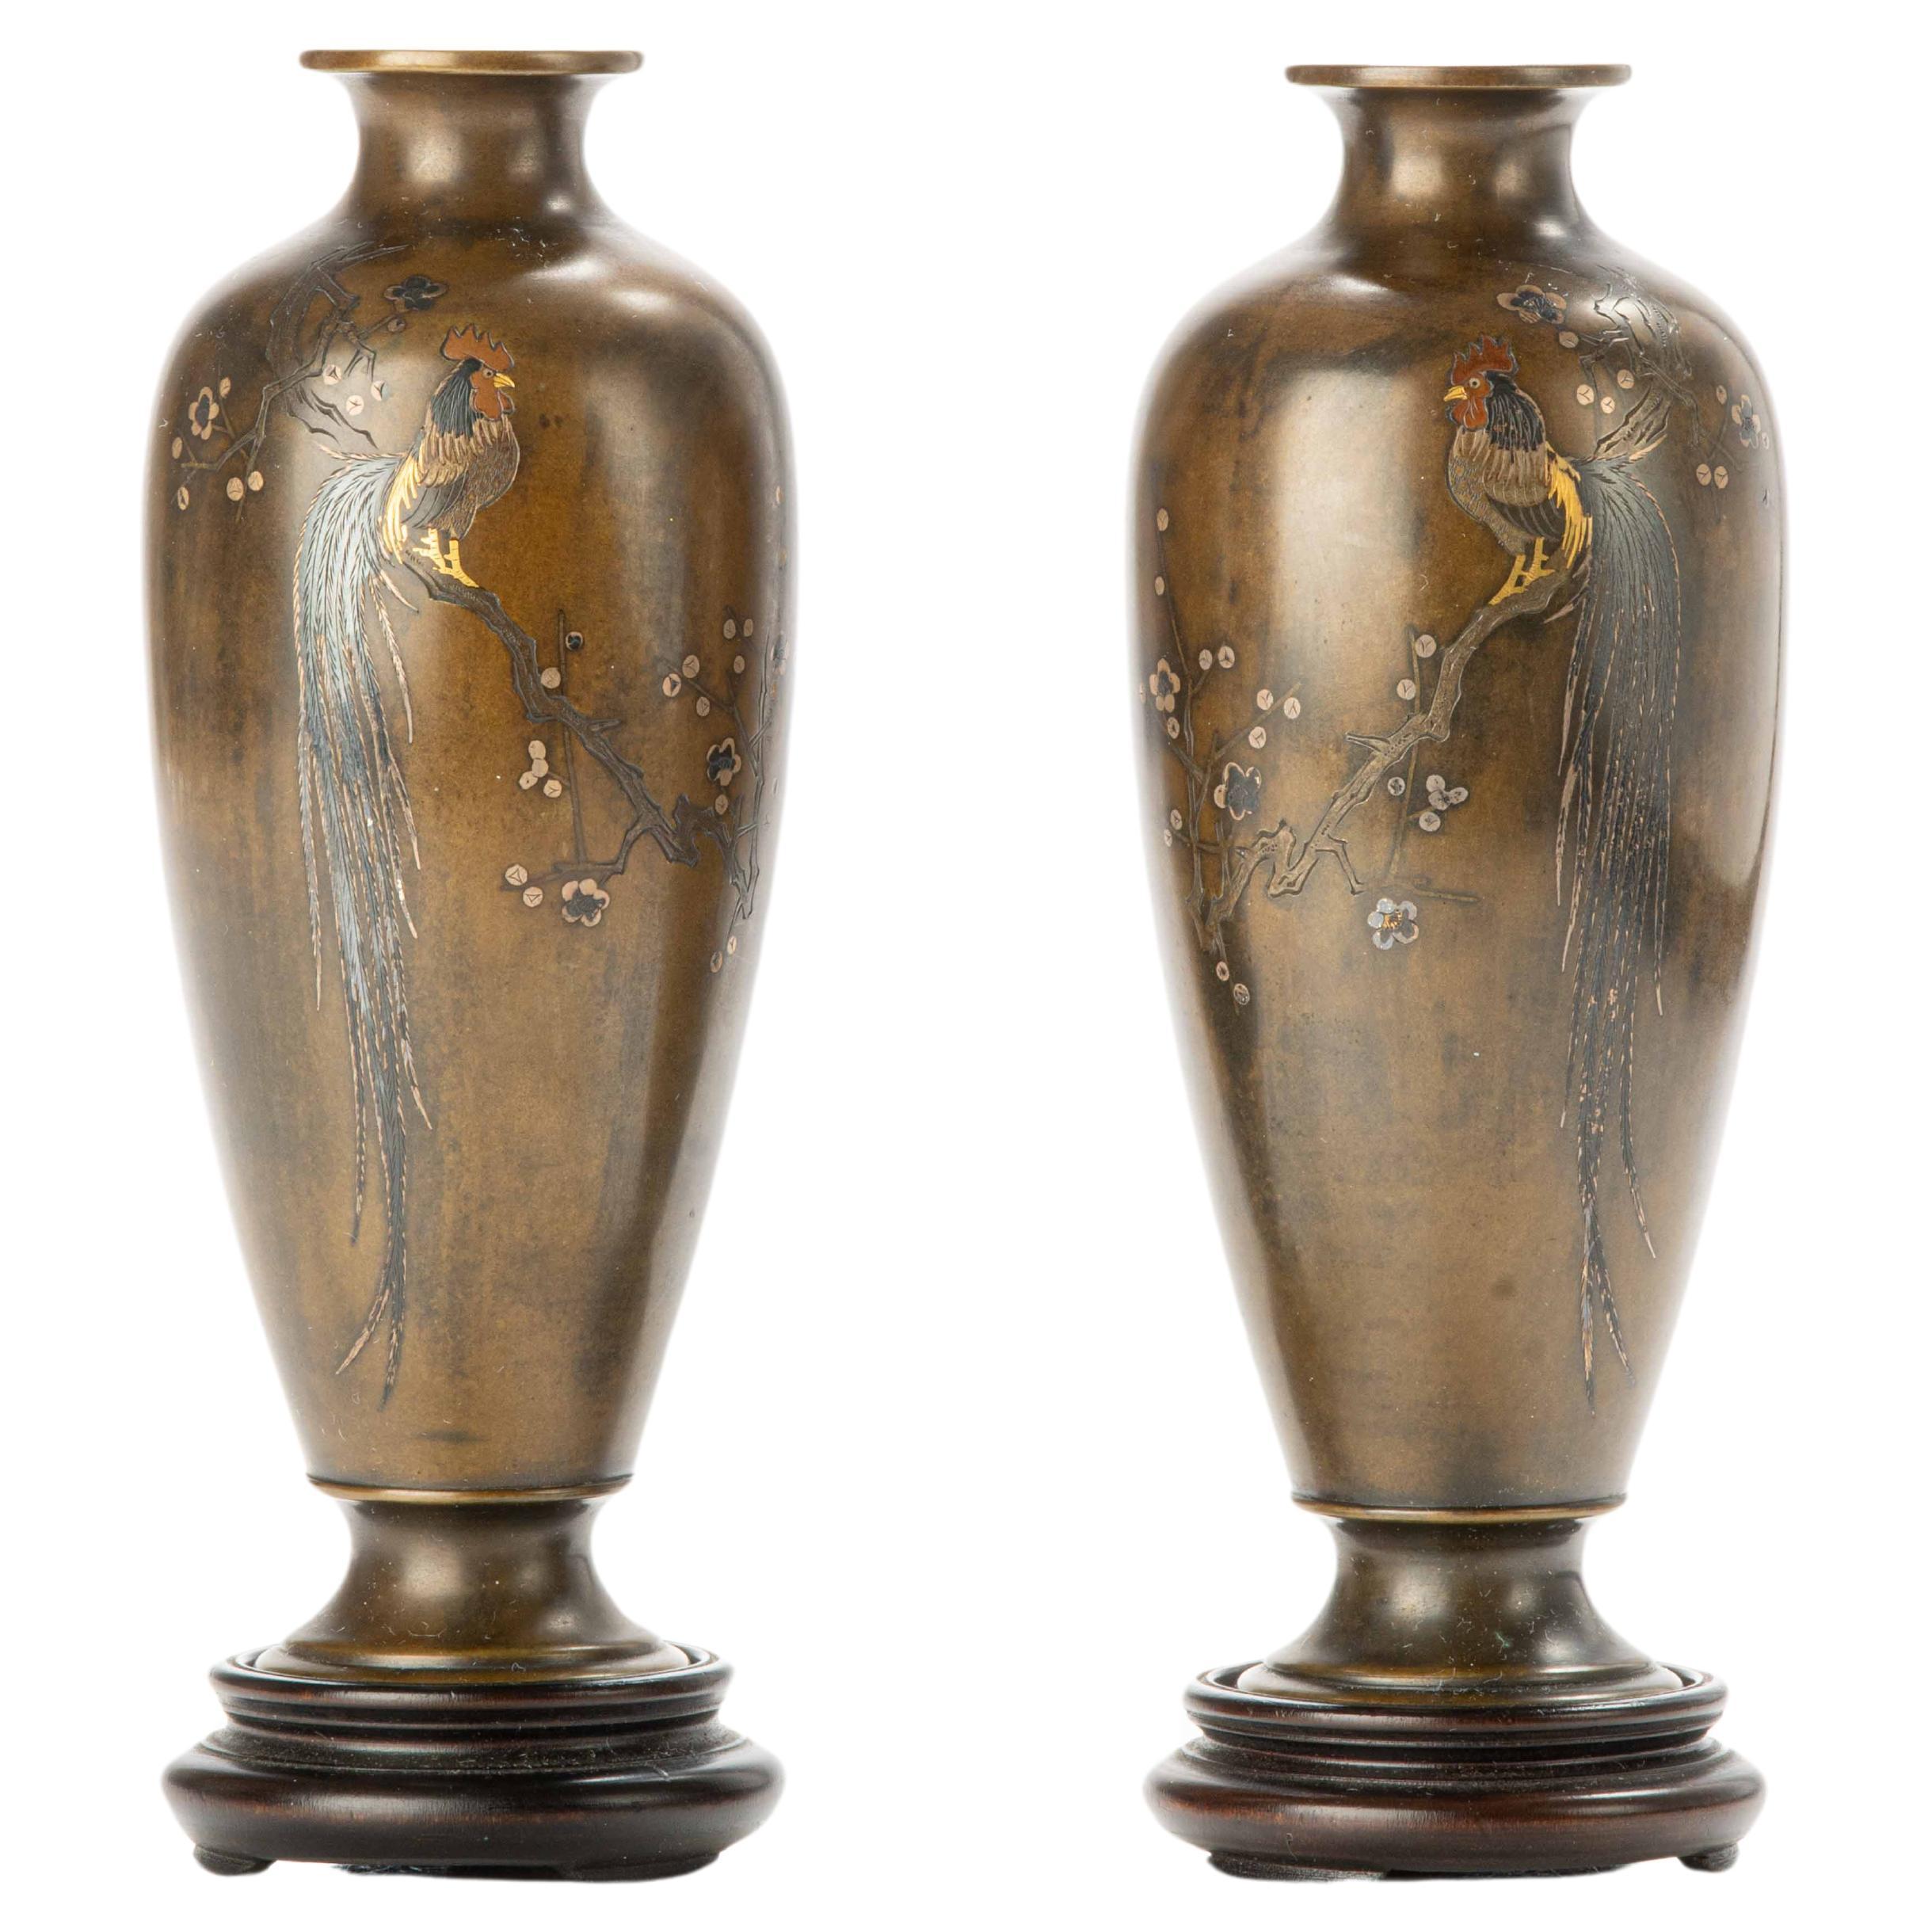 A pair of bronze vases with Onagadori roosters